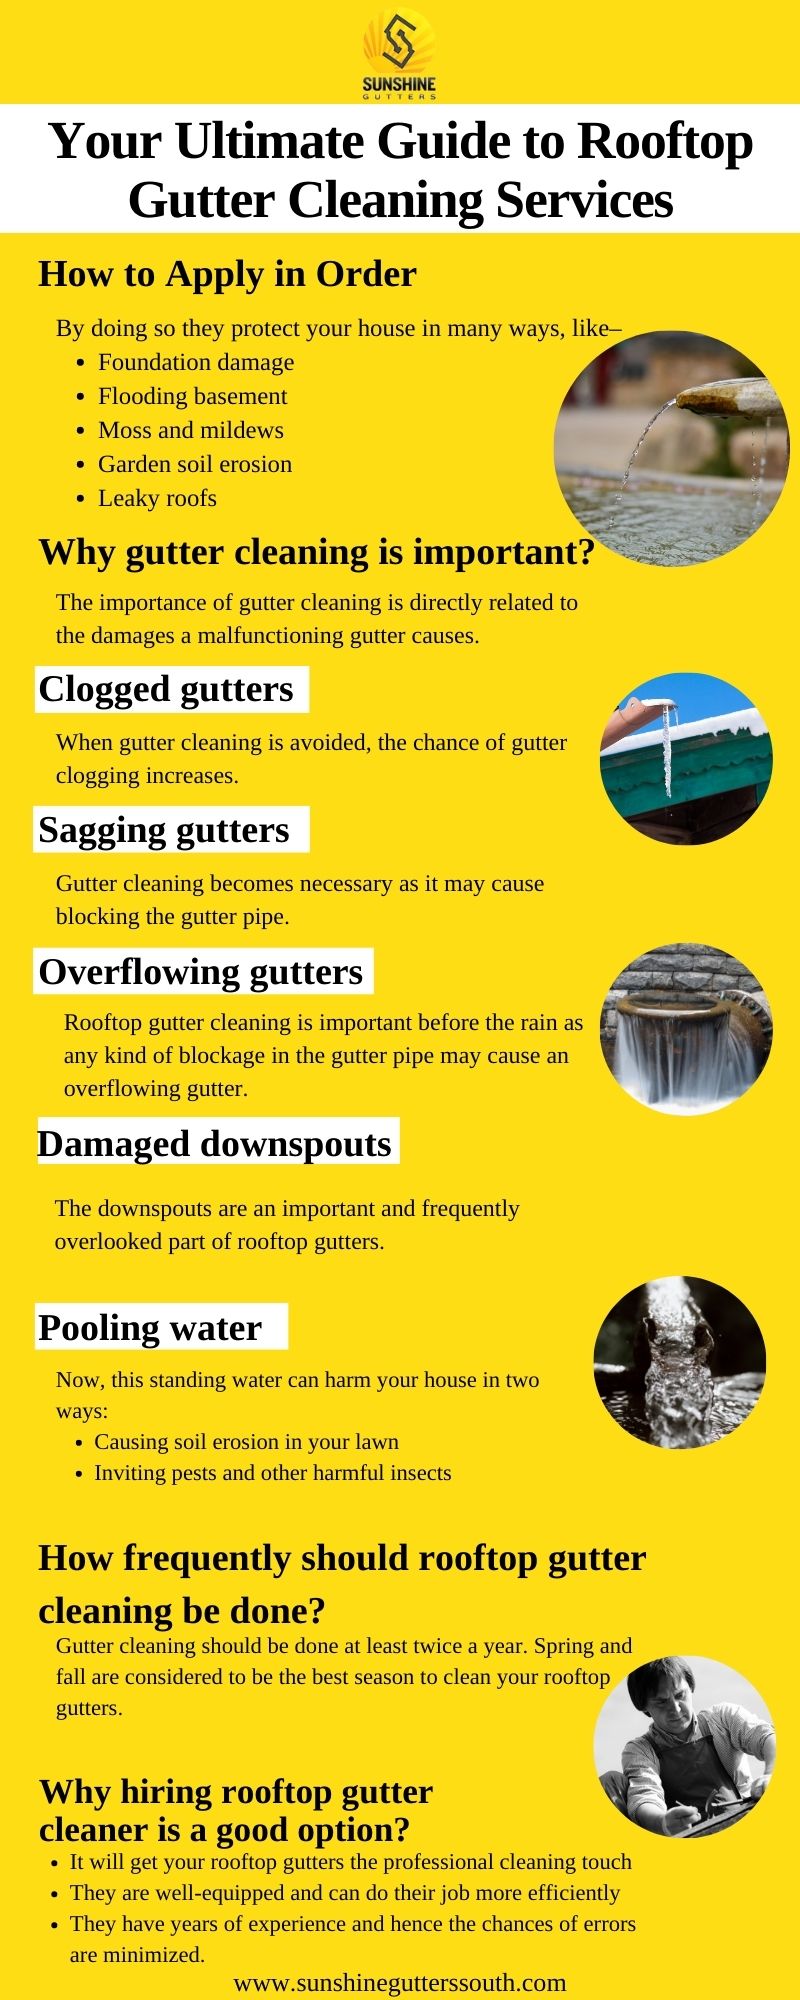 Your Ultimate Guide to Rooftop Gutter Cleaning Services